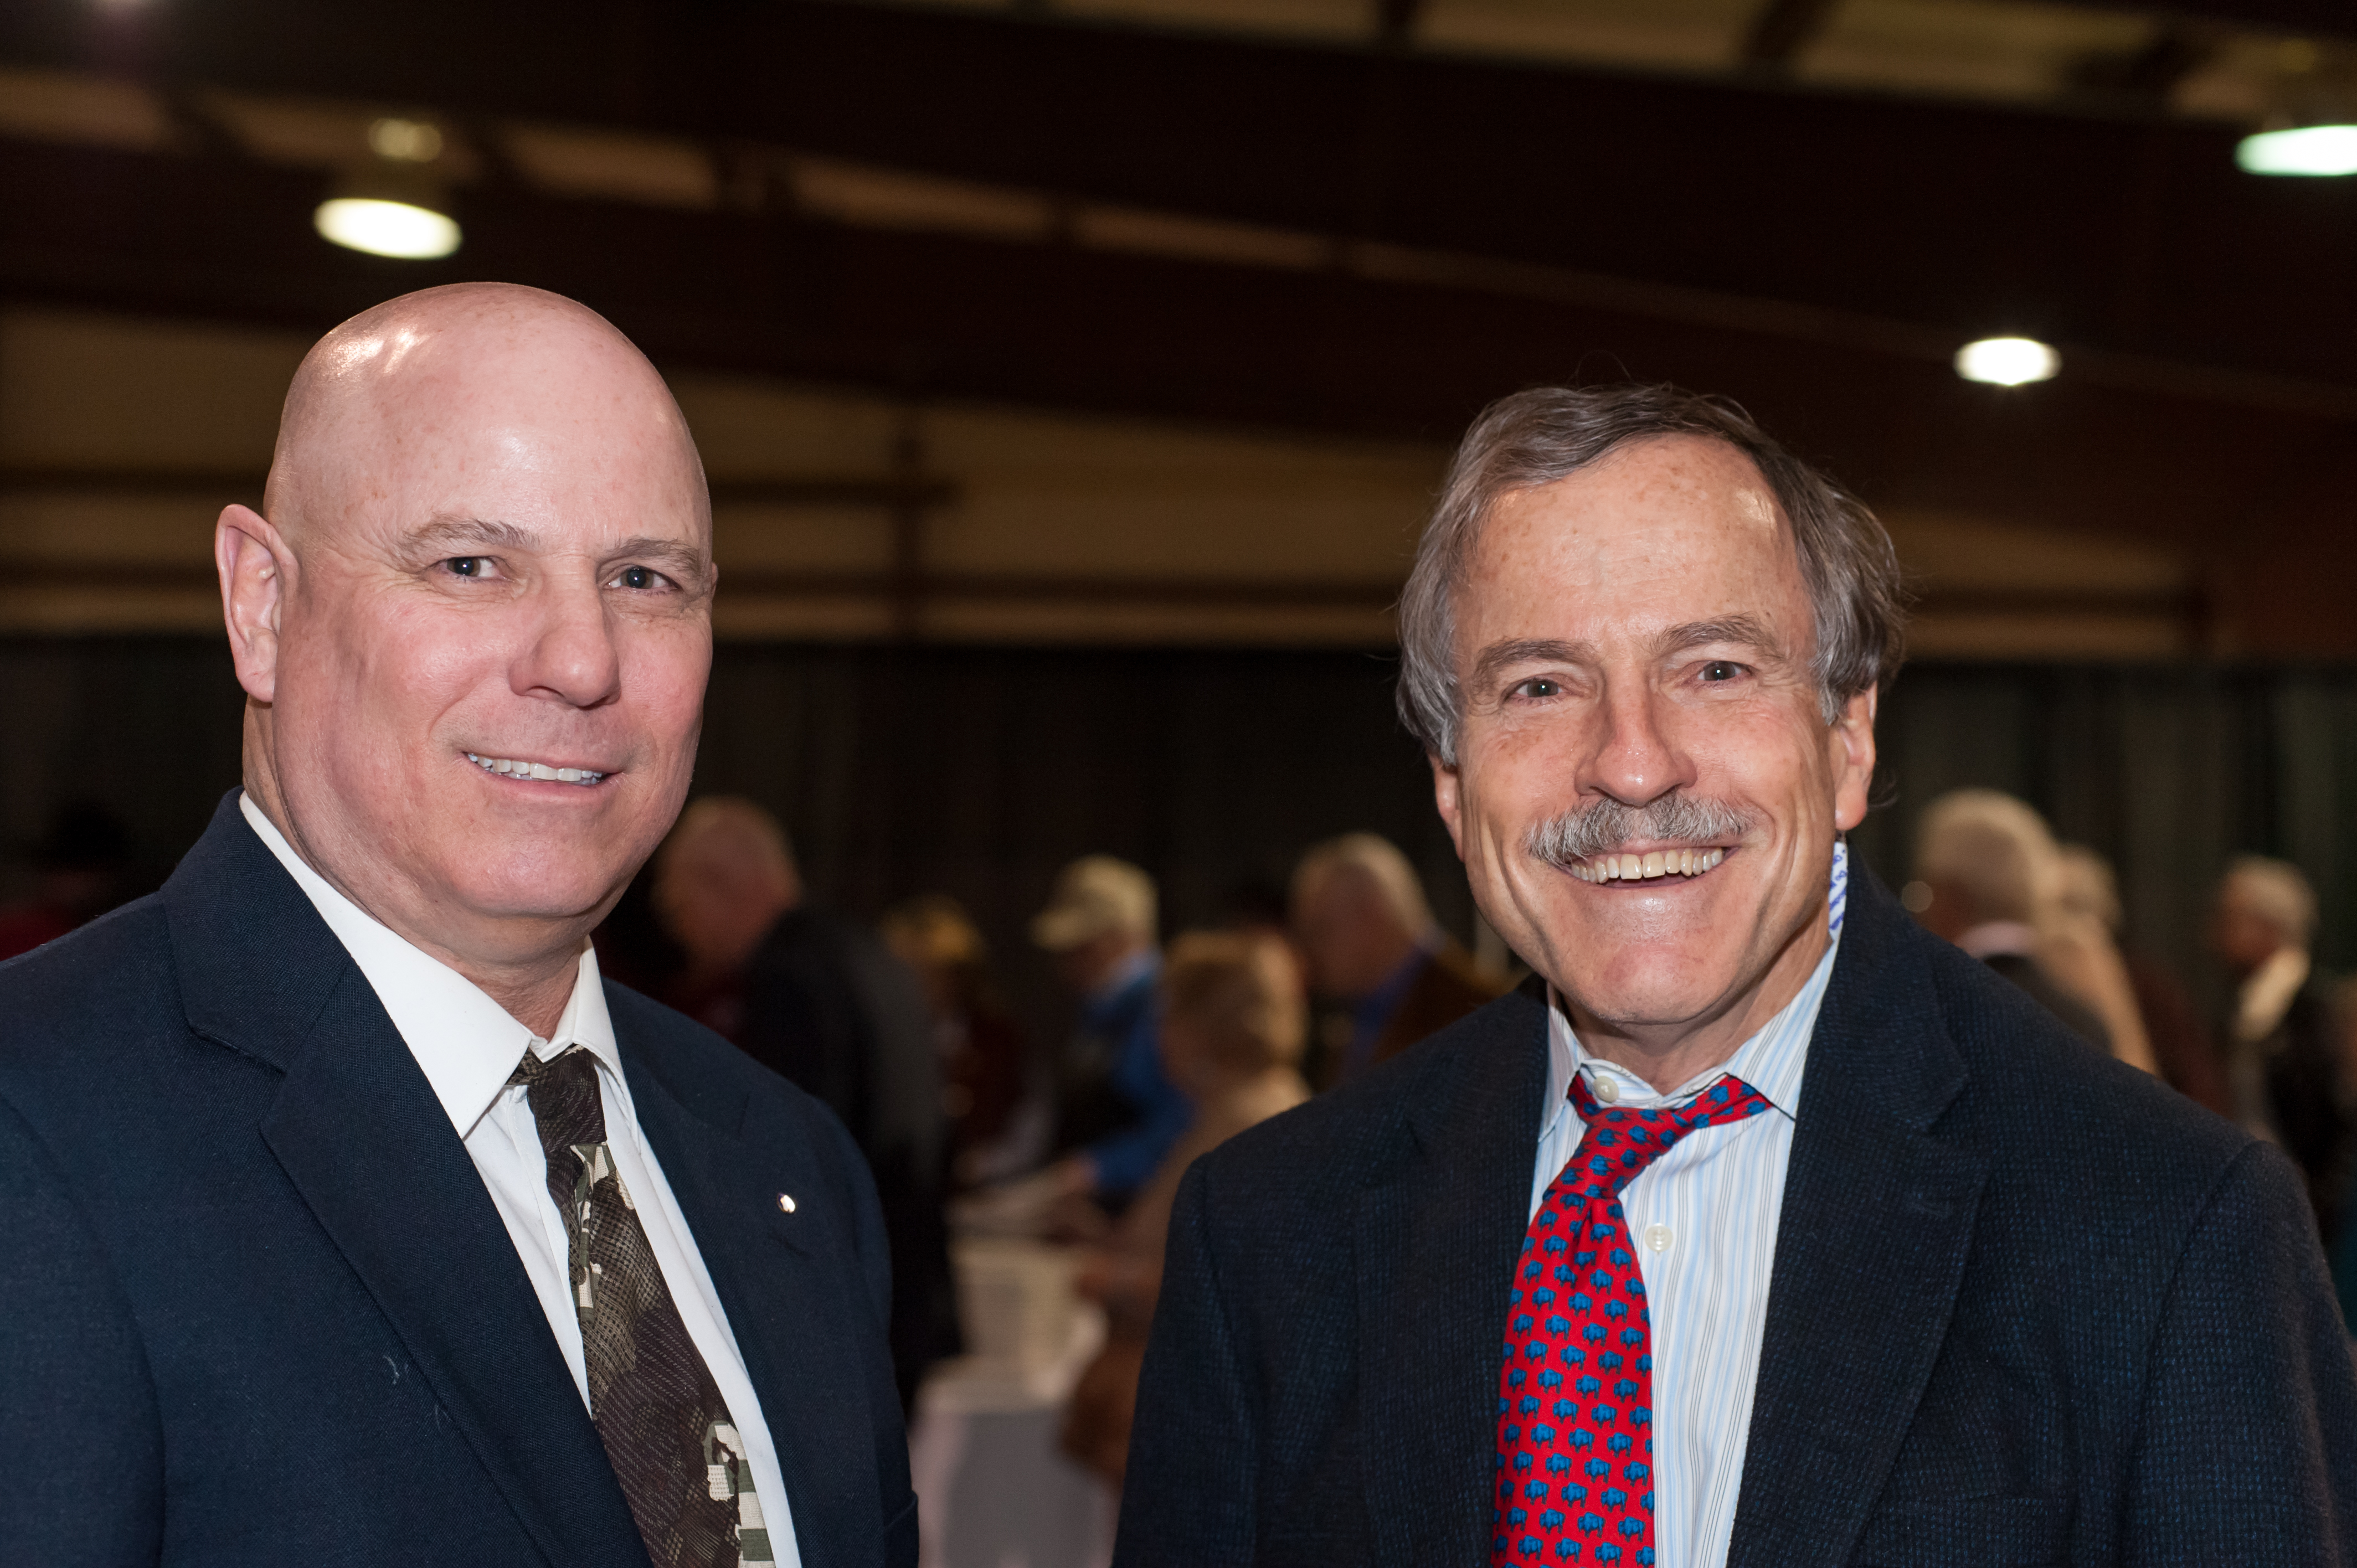 Shaie Williams for AGN Media. John and Bob Gerald at the Texas Panhandle Lincoln-Reagan Day Dinner hosted by the local Republican party groups held at The Rex Baxter Building in Amarillo, TX on January 29, 2016